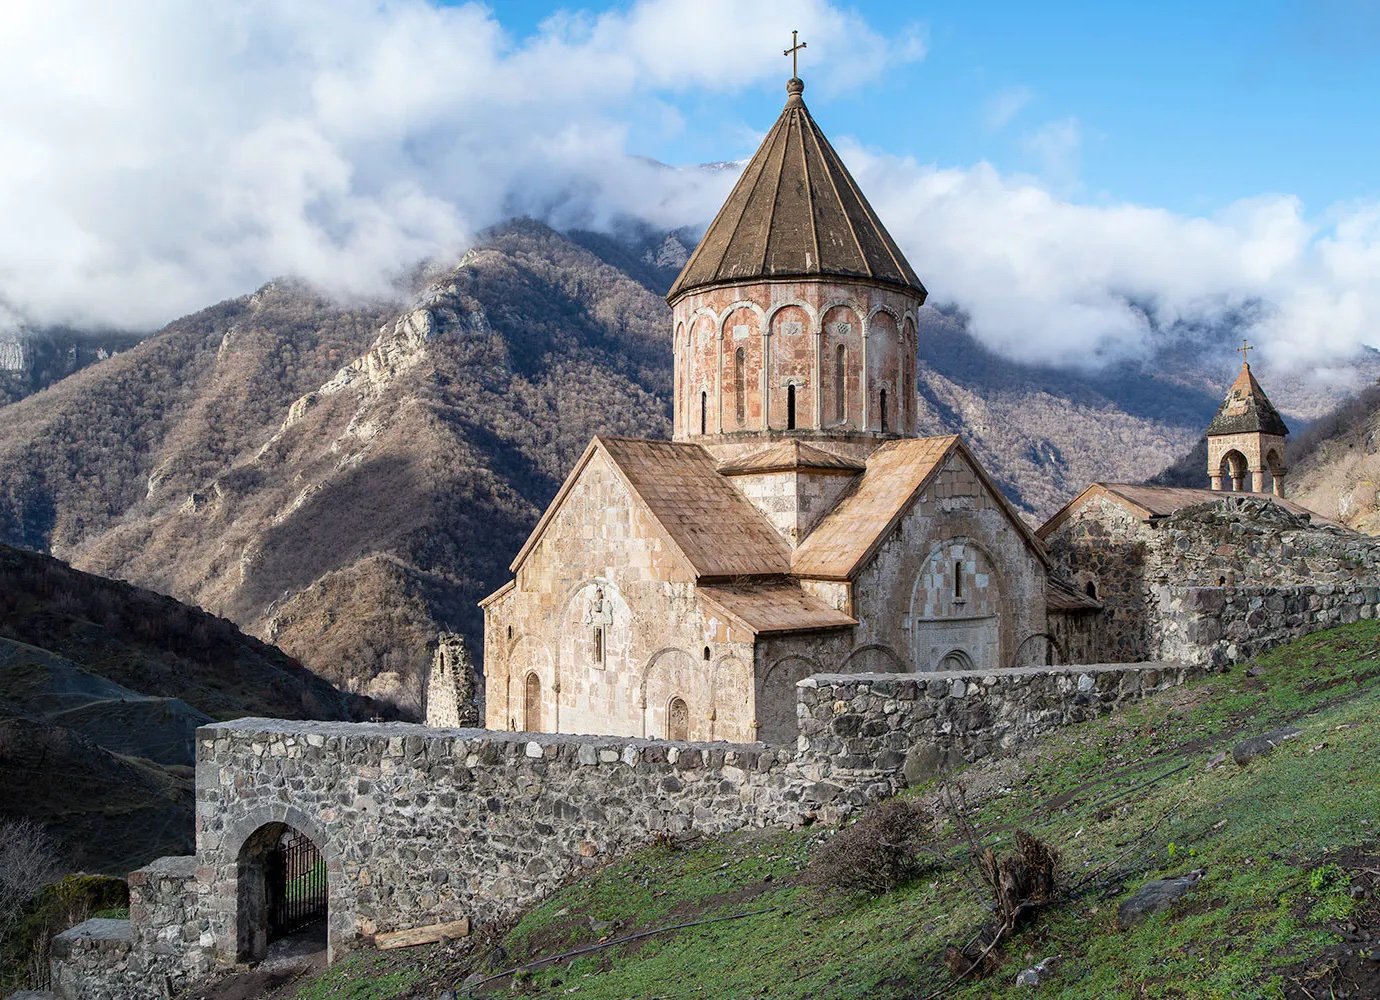 A new online exhibition takes viewers on a 3D tour of Christian monuments in Nagorno-Karabakh